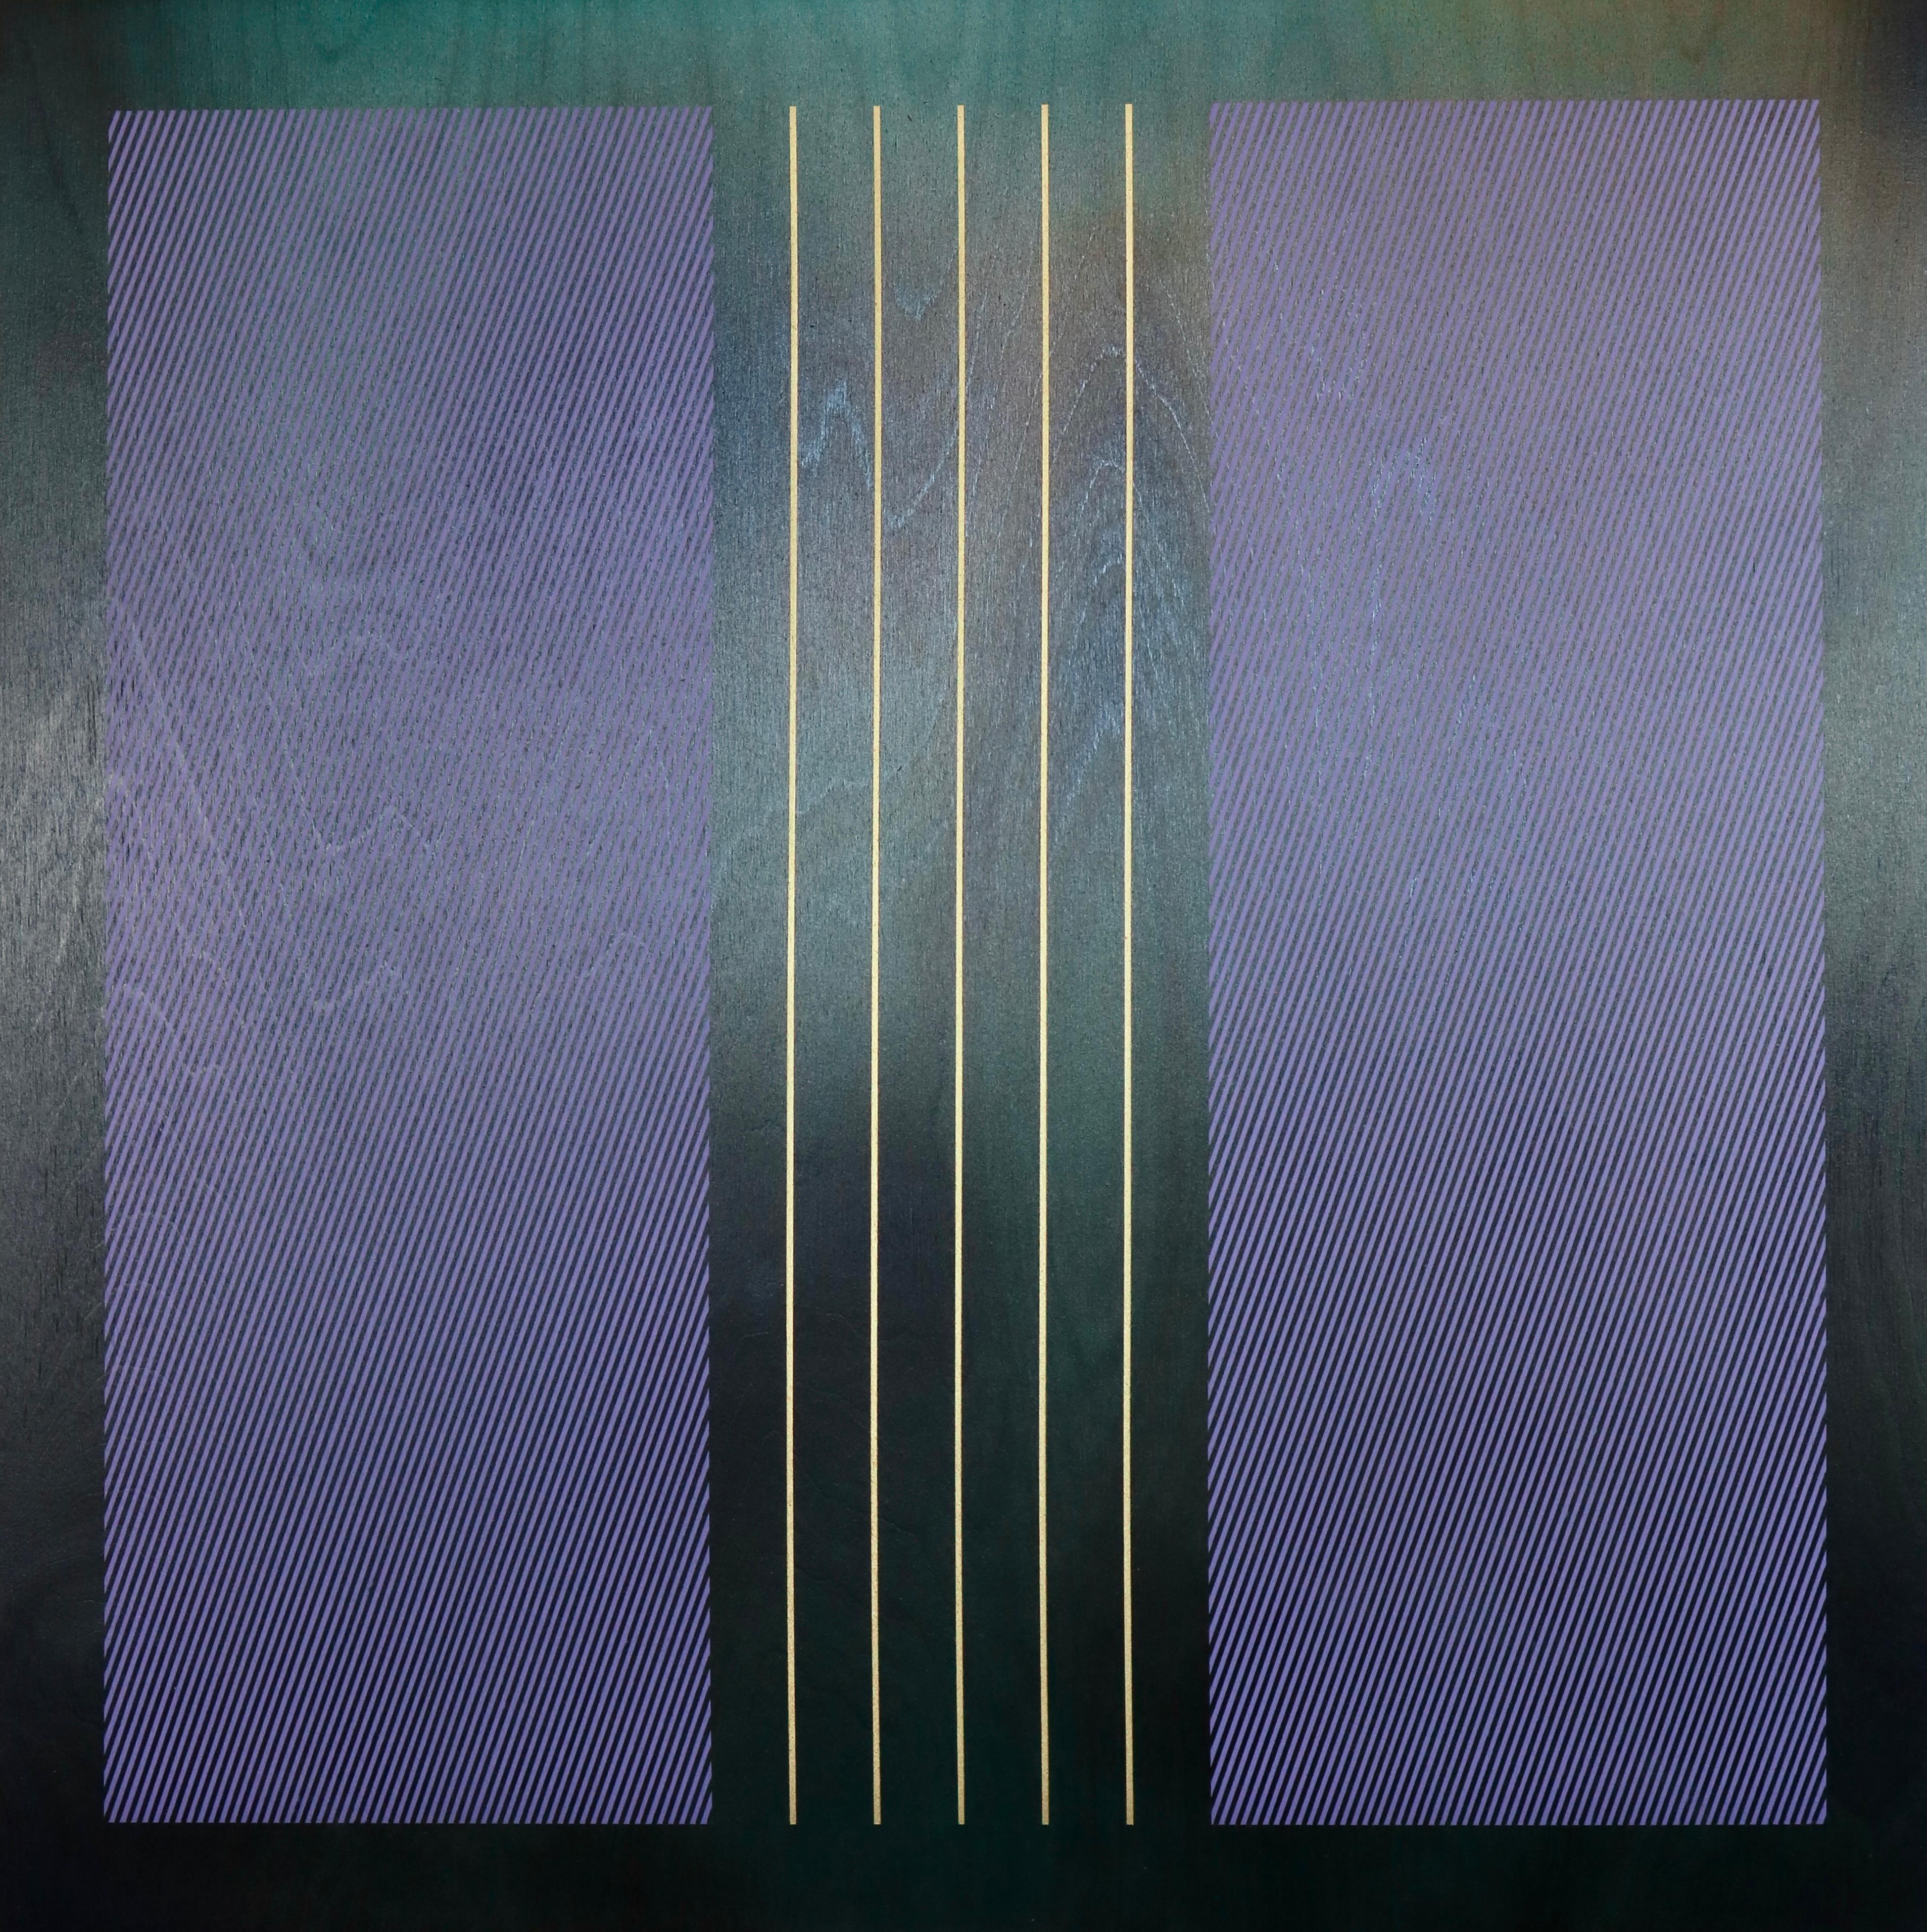 3 Mangatas tryptic panels as column (or row) (tryptic, squares, minimal, grid) - Painting by Melisa Taylor Metzger